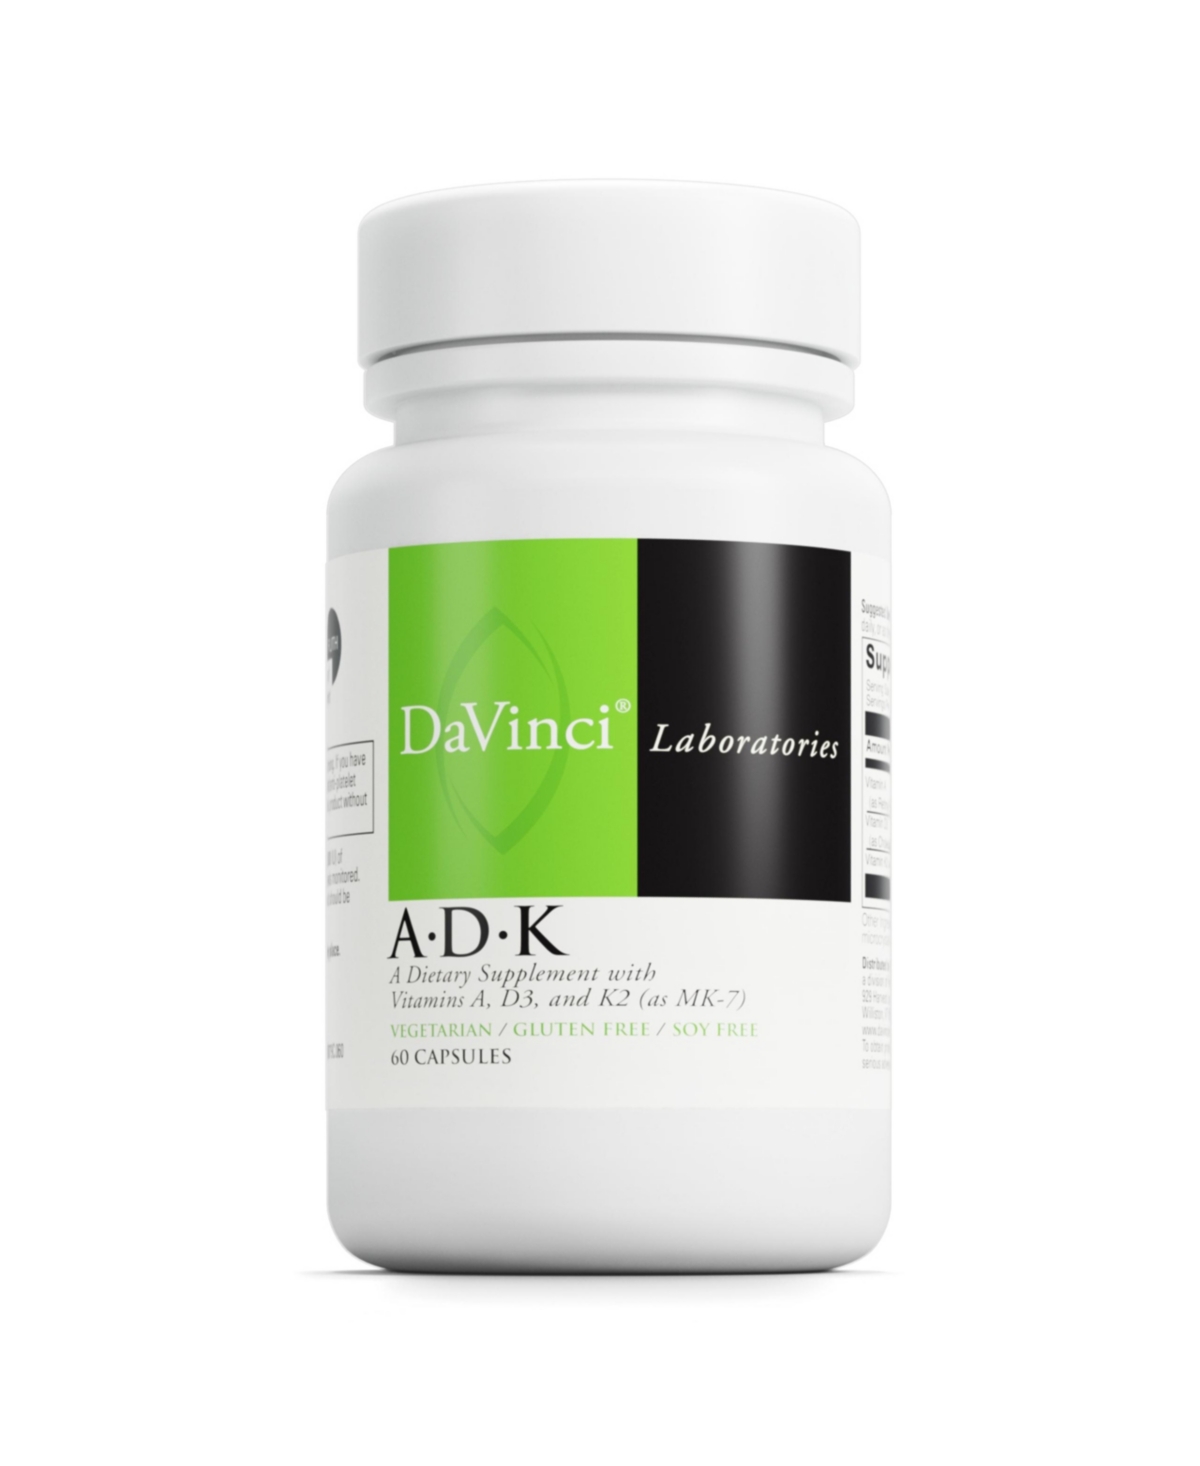 DaVinci Labs Adk - Dietary Supplement to Support Bone Structure, Heart Health and Immune Function - With Vitamin A, Vitamin D3 5,